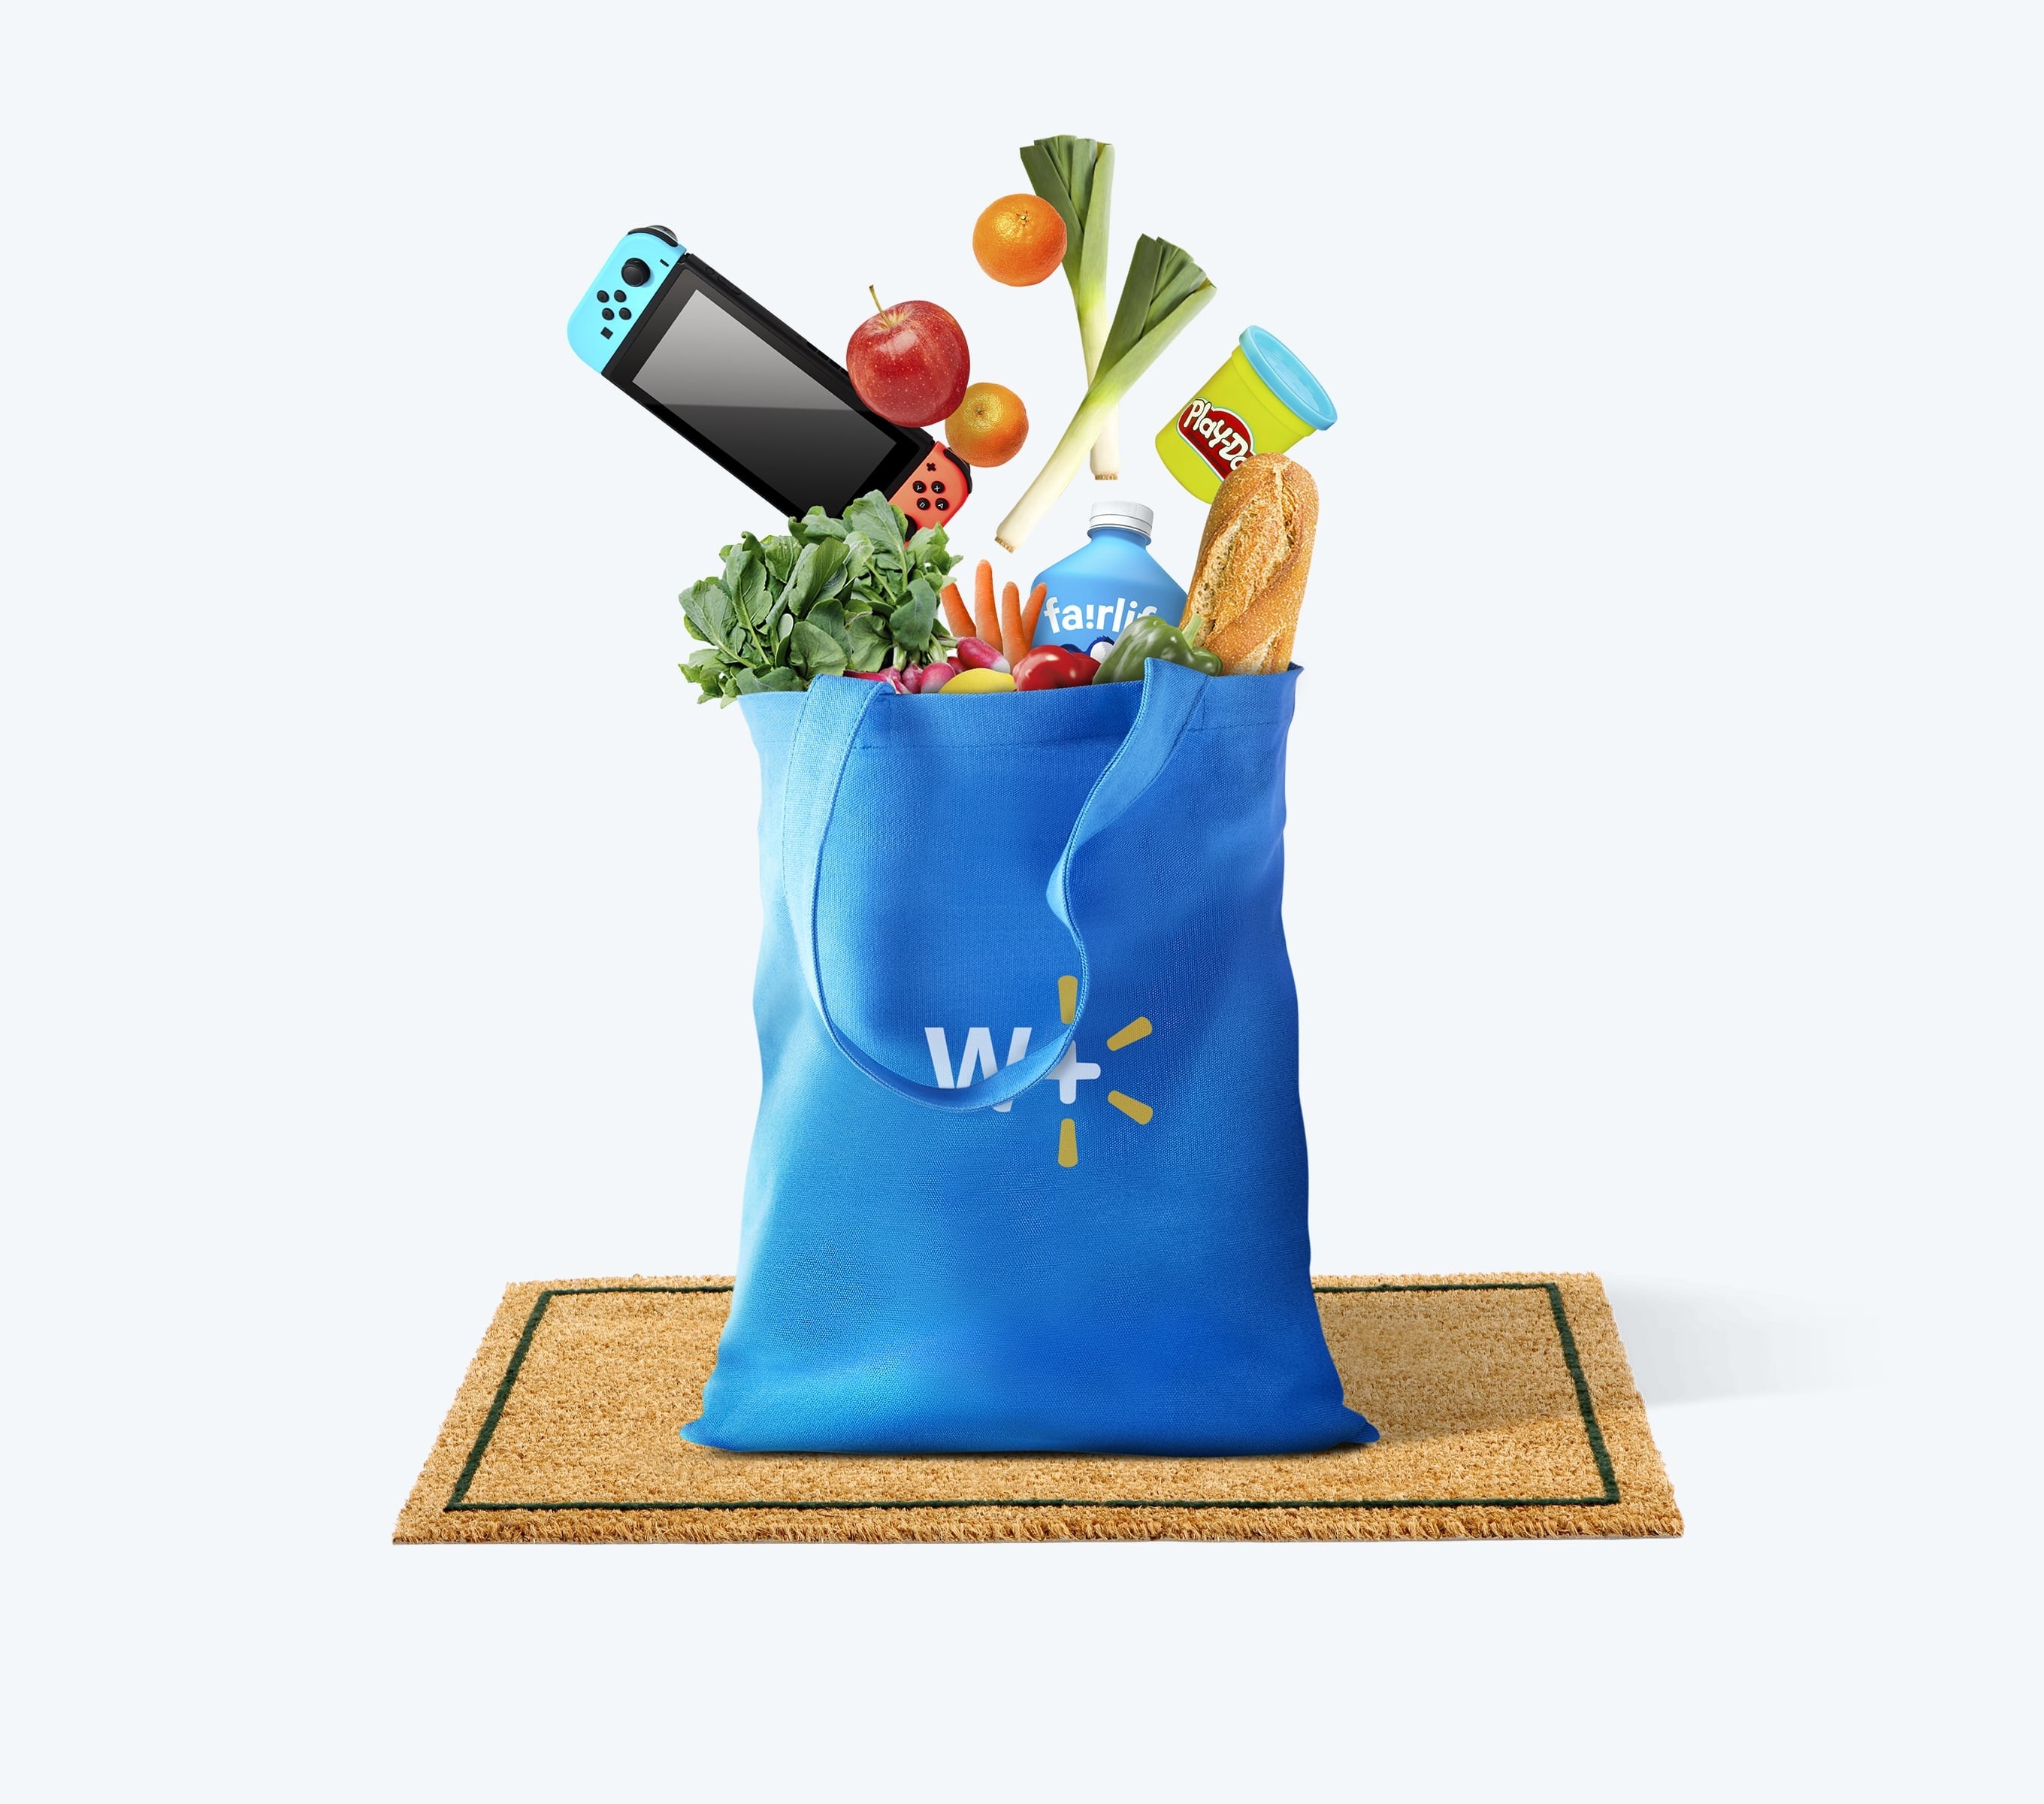 Walmart bag of groceries on a welcome mat